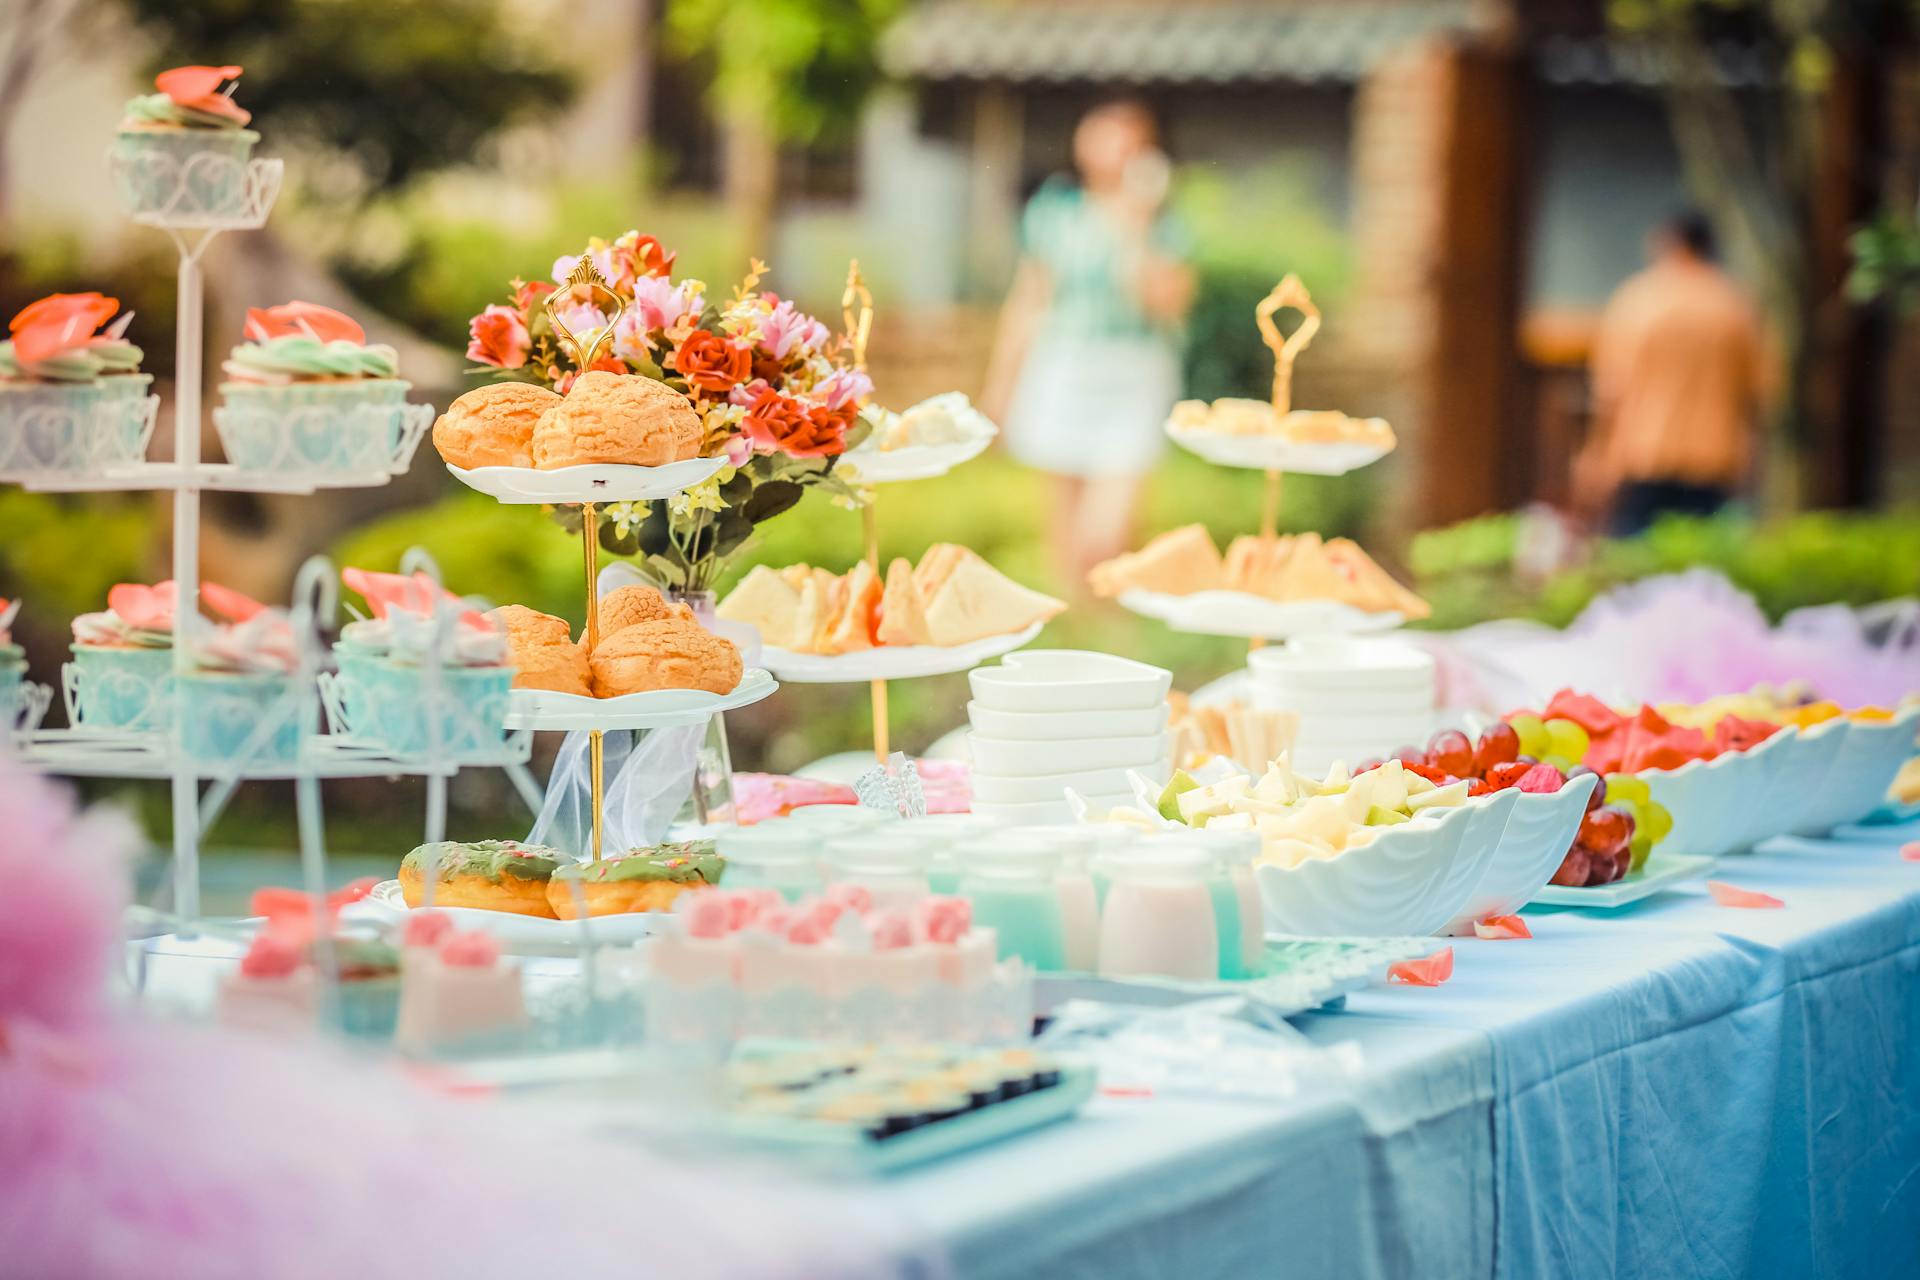 Wedding Foods That Will Leave a Lasting Impression